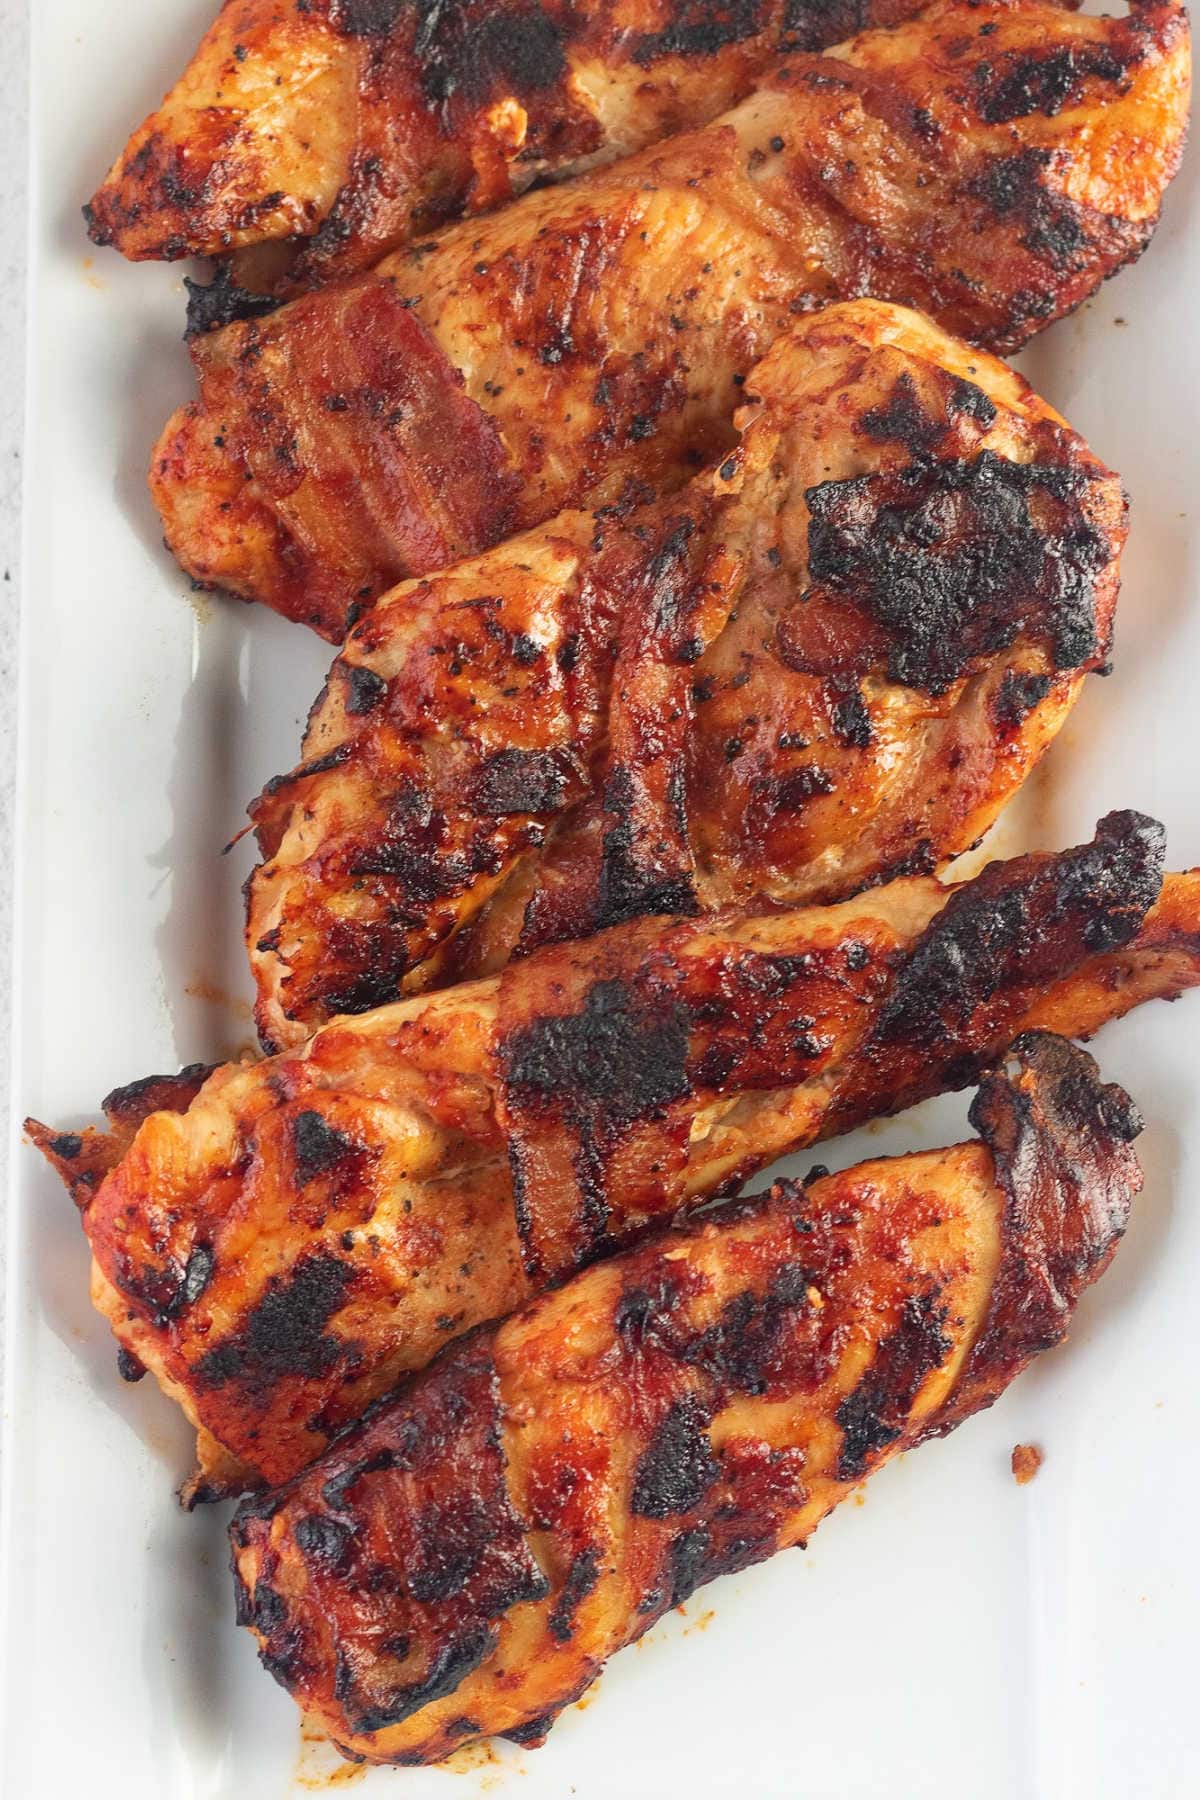 Overhead view of grilled chicken on a white plate.